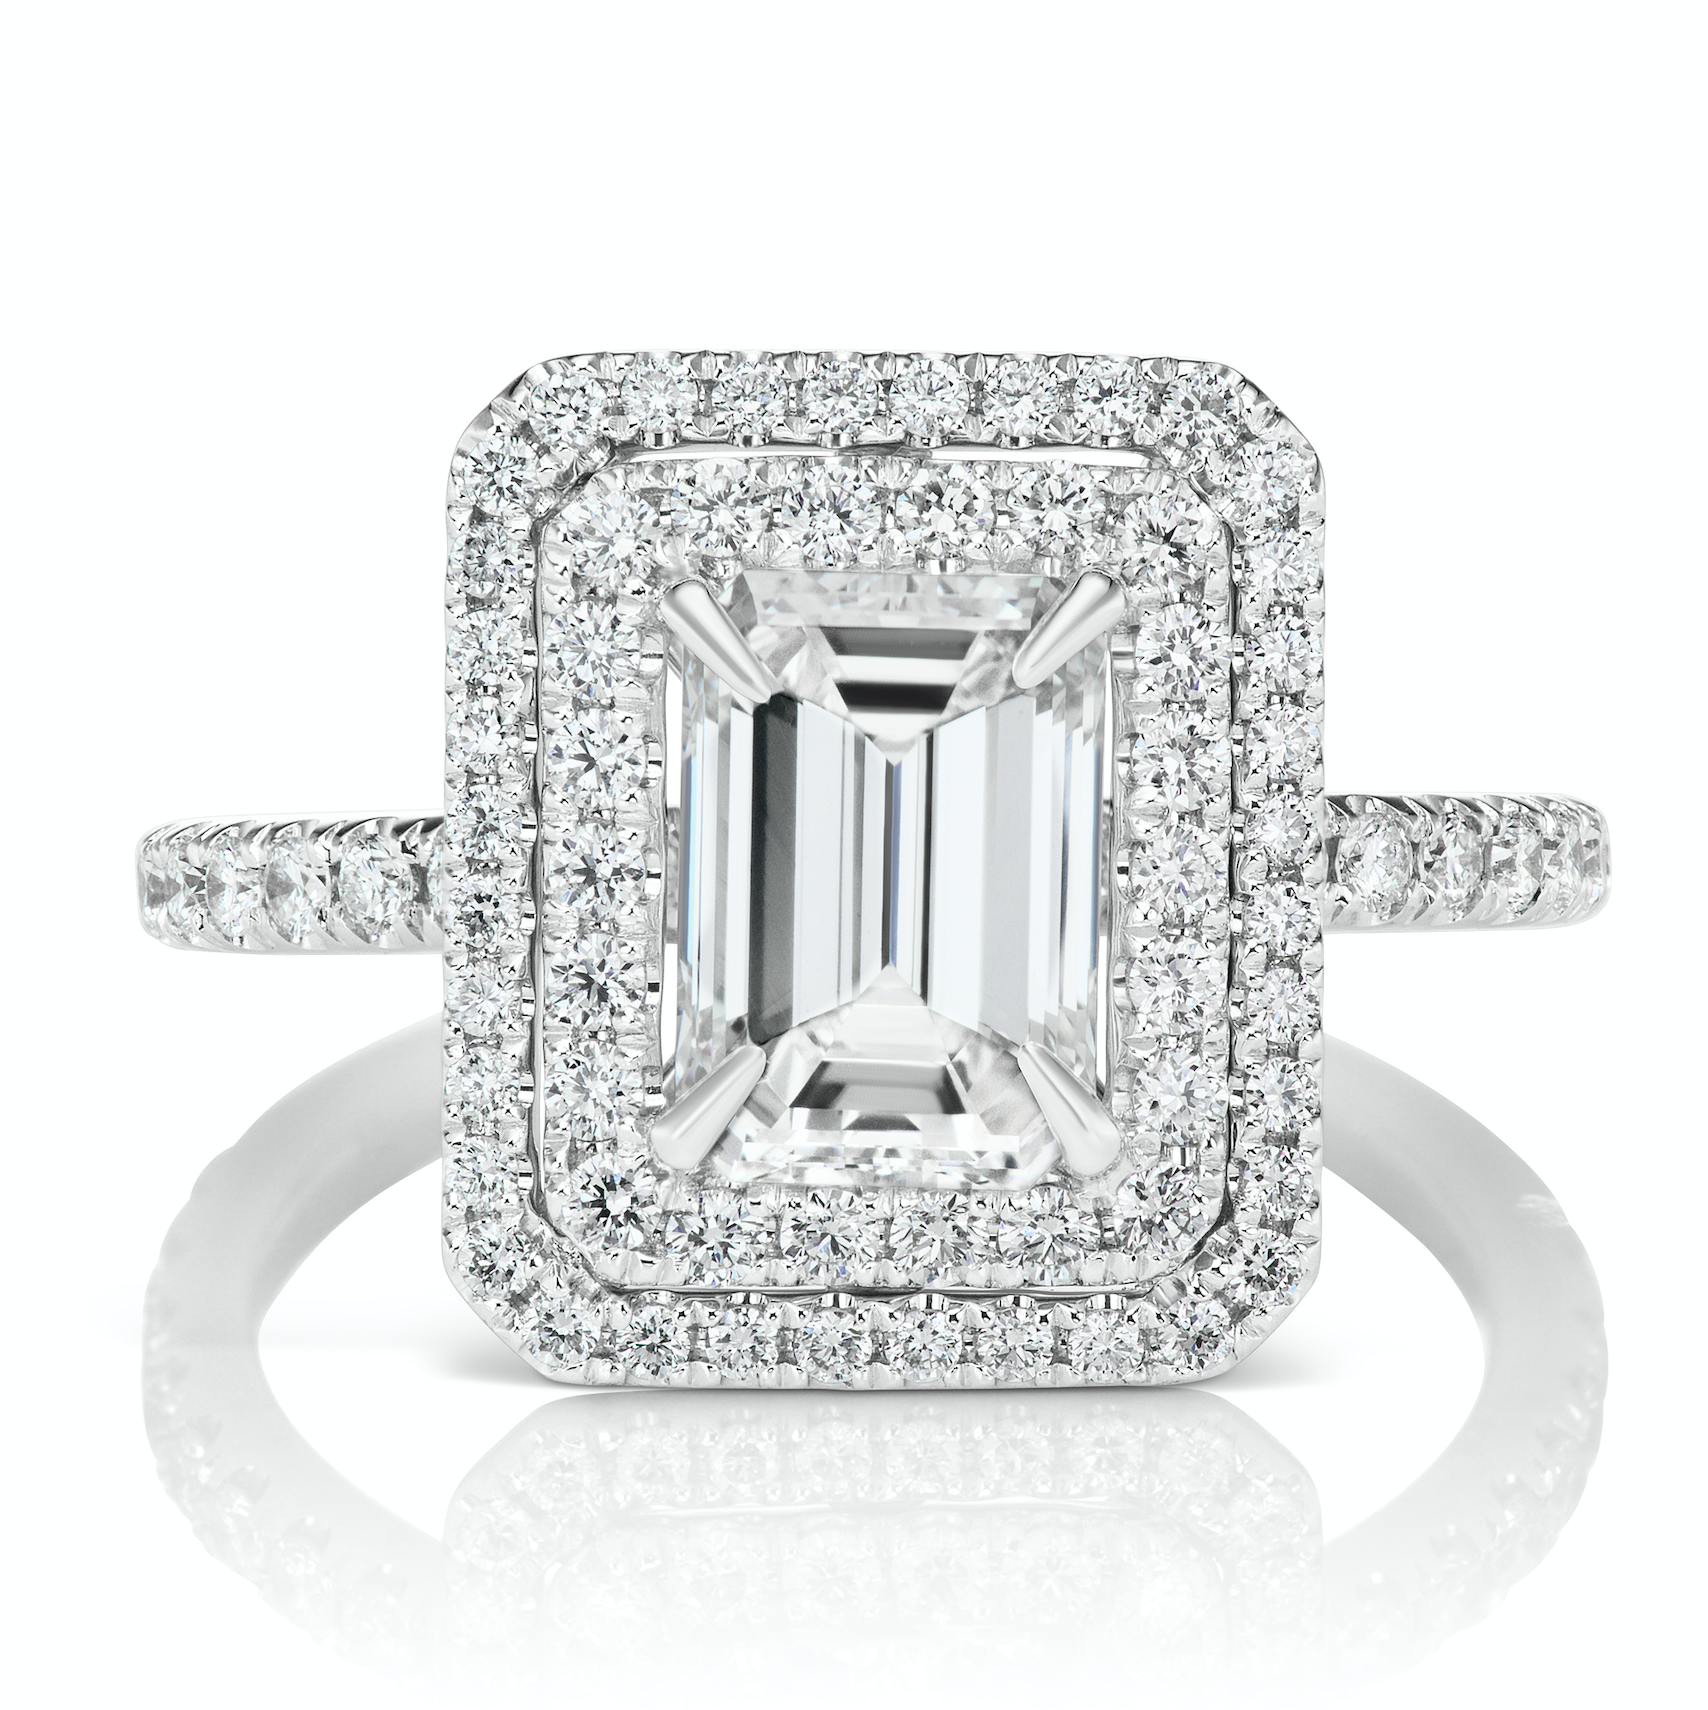 Diamond Ring Emerald Cut 2 Carat Halo Ring in 18K White Gold Front View